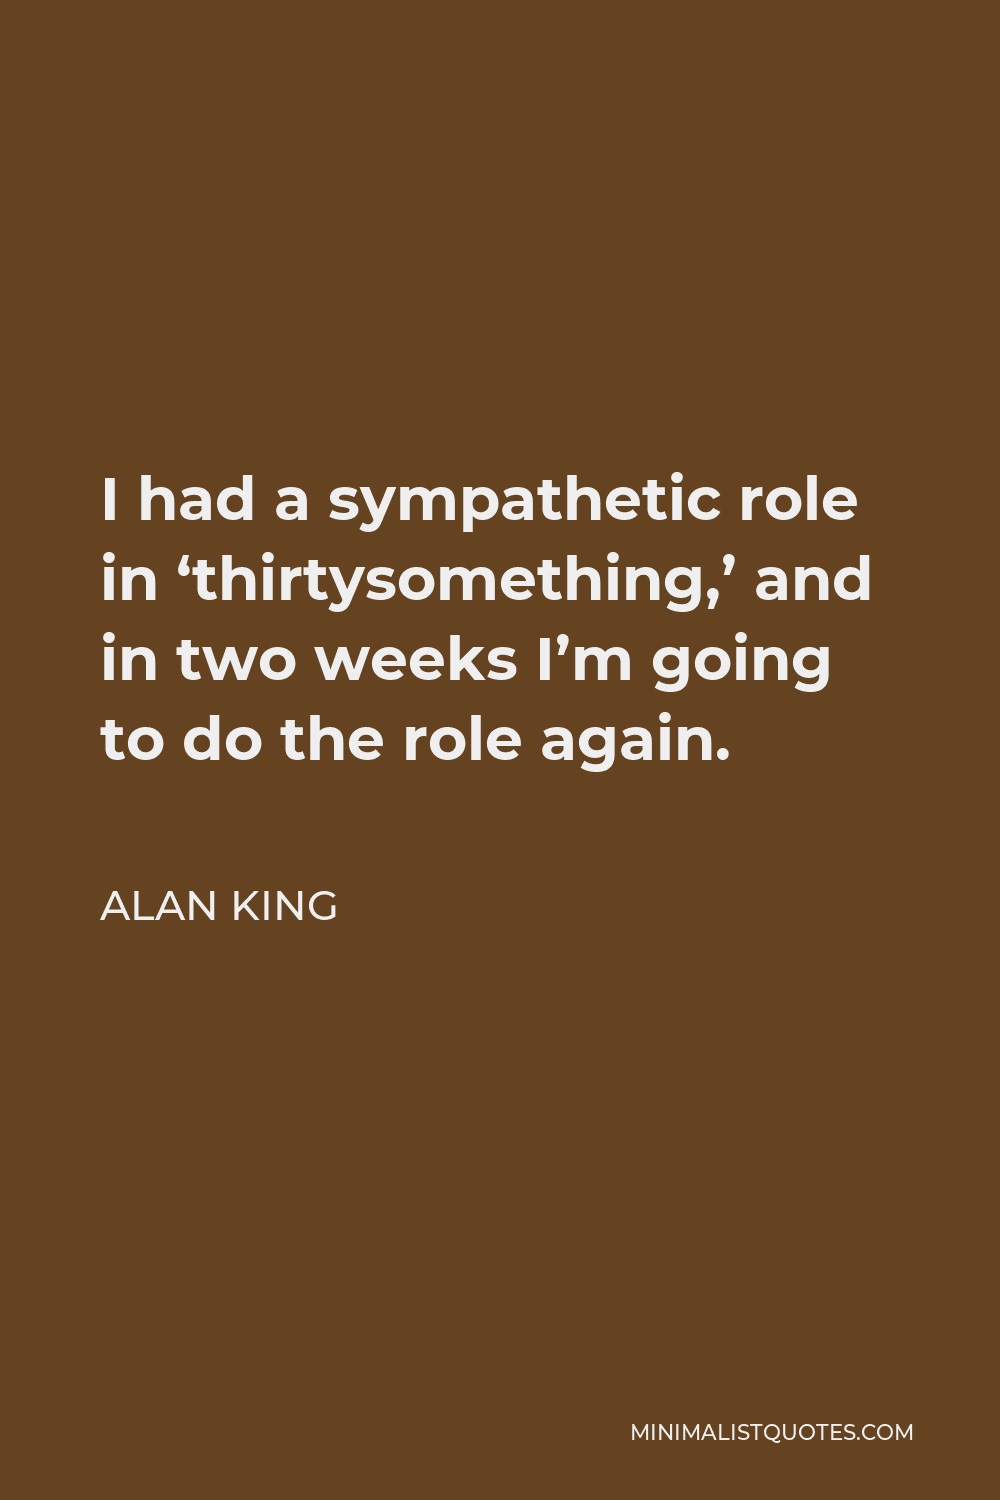 Alan King Quote - I had a sympathetic role in ‘thirtysomething,’ and in two weeks I’m going to do the role again.